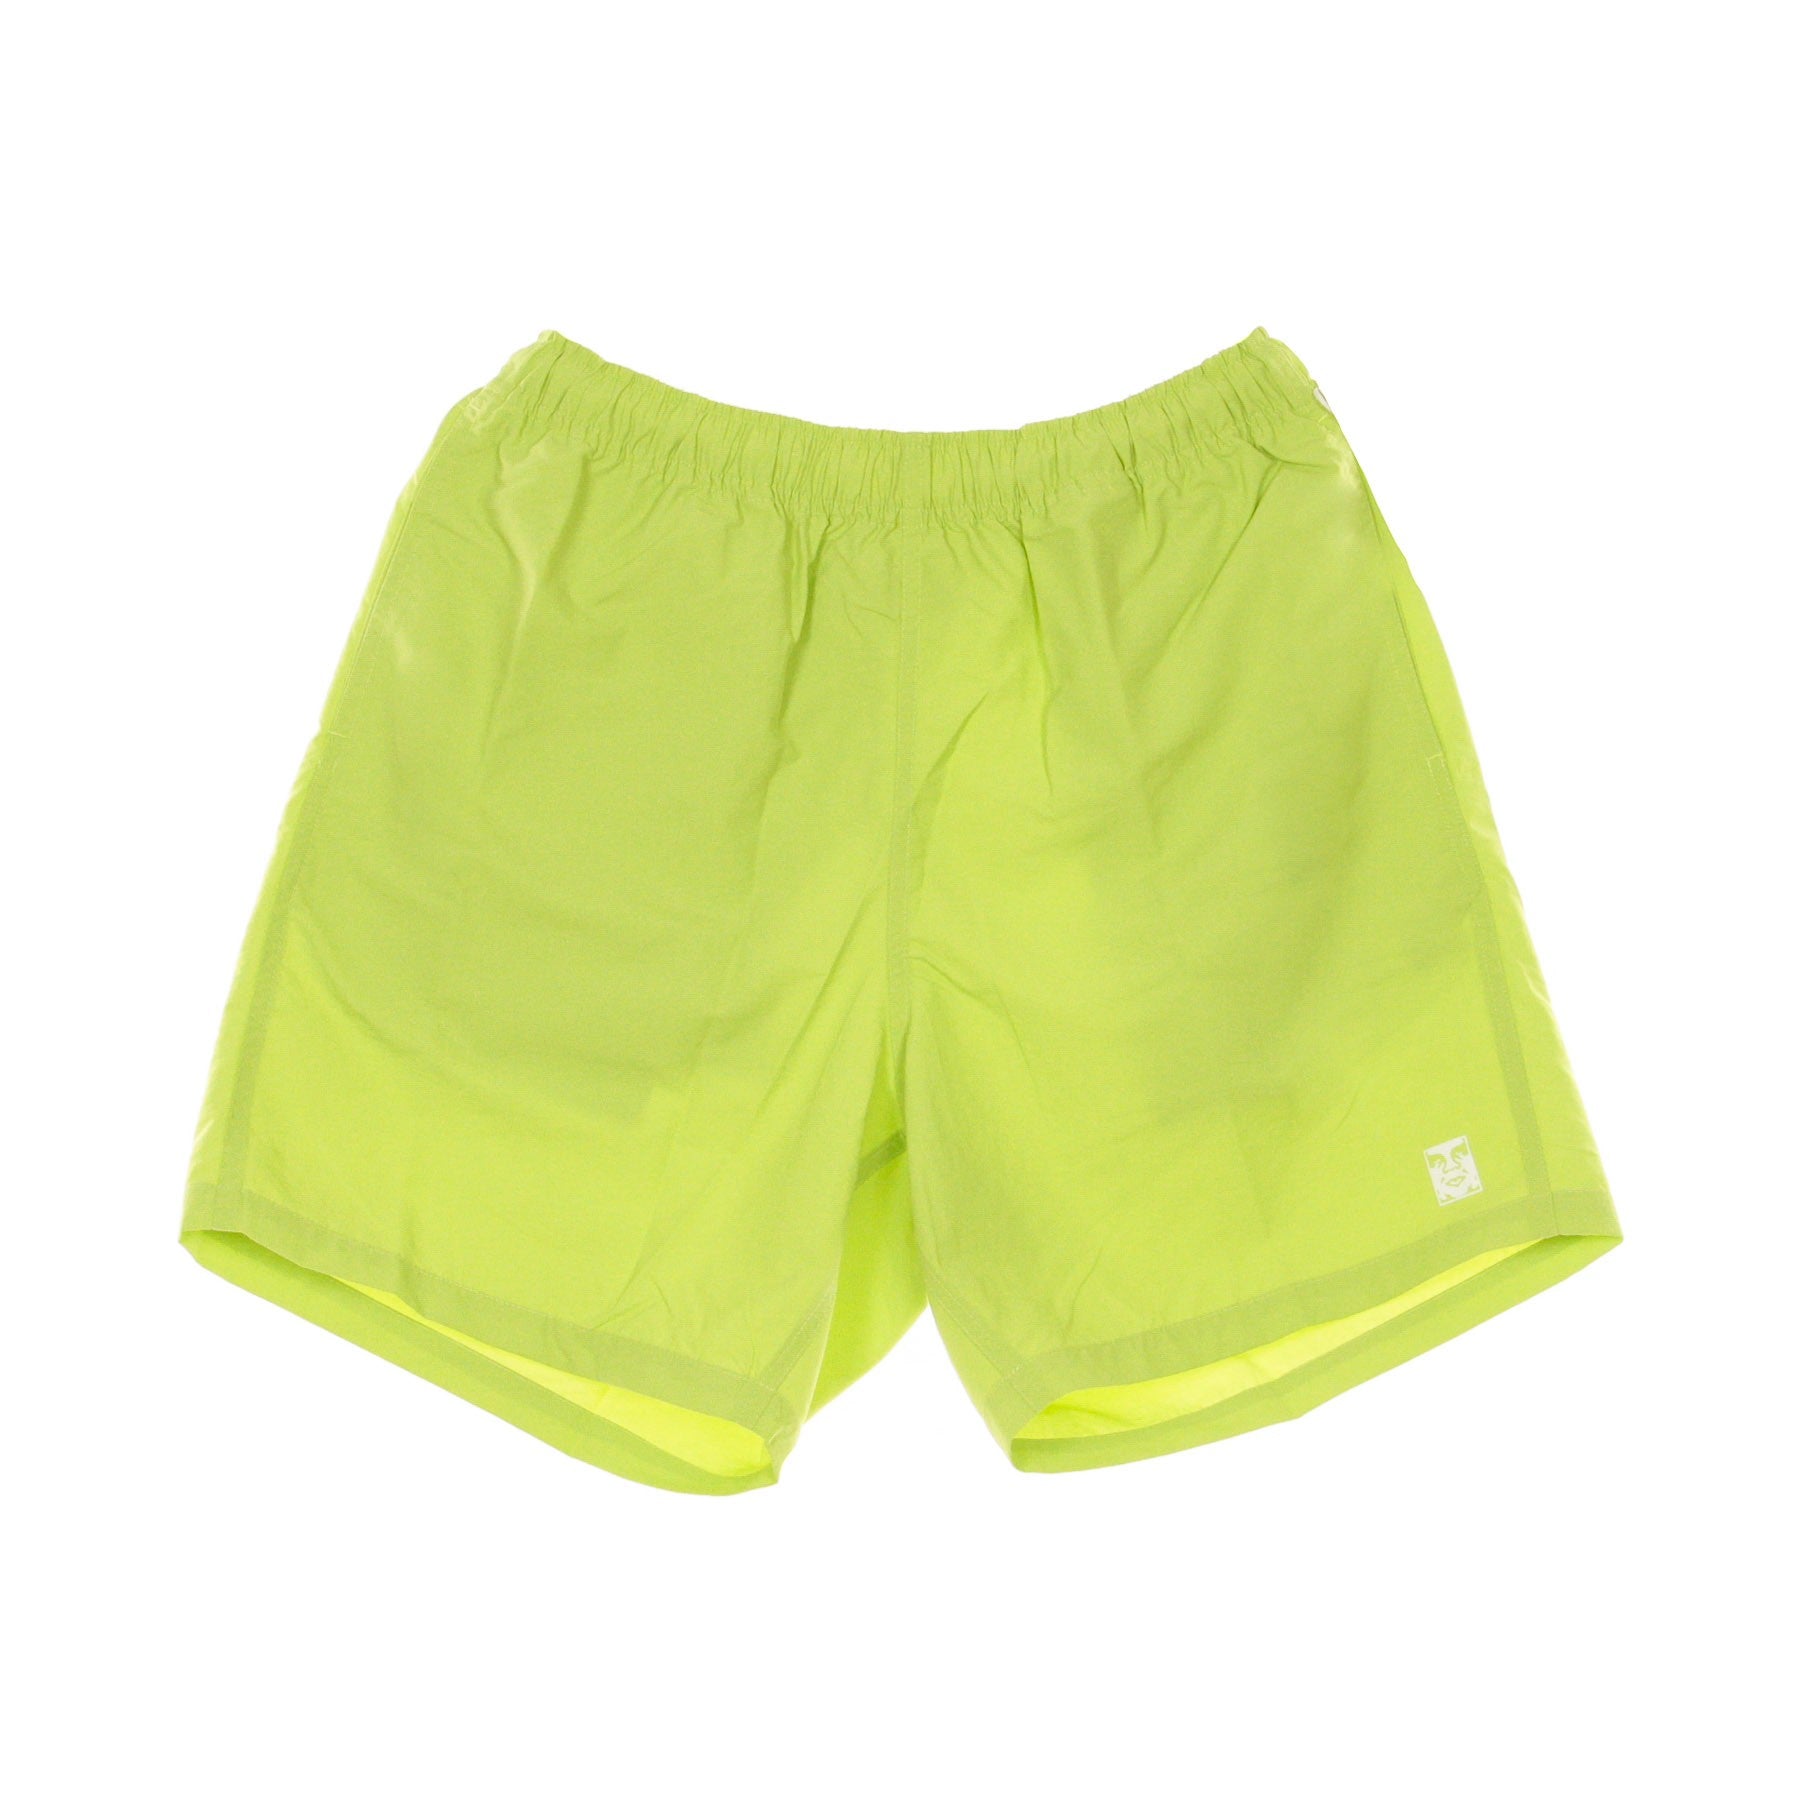 Obey, Pantaloncino Uomo Easy Relaxed, Key Lime